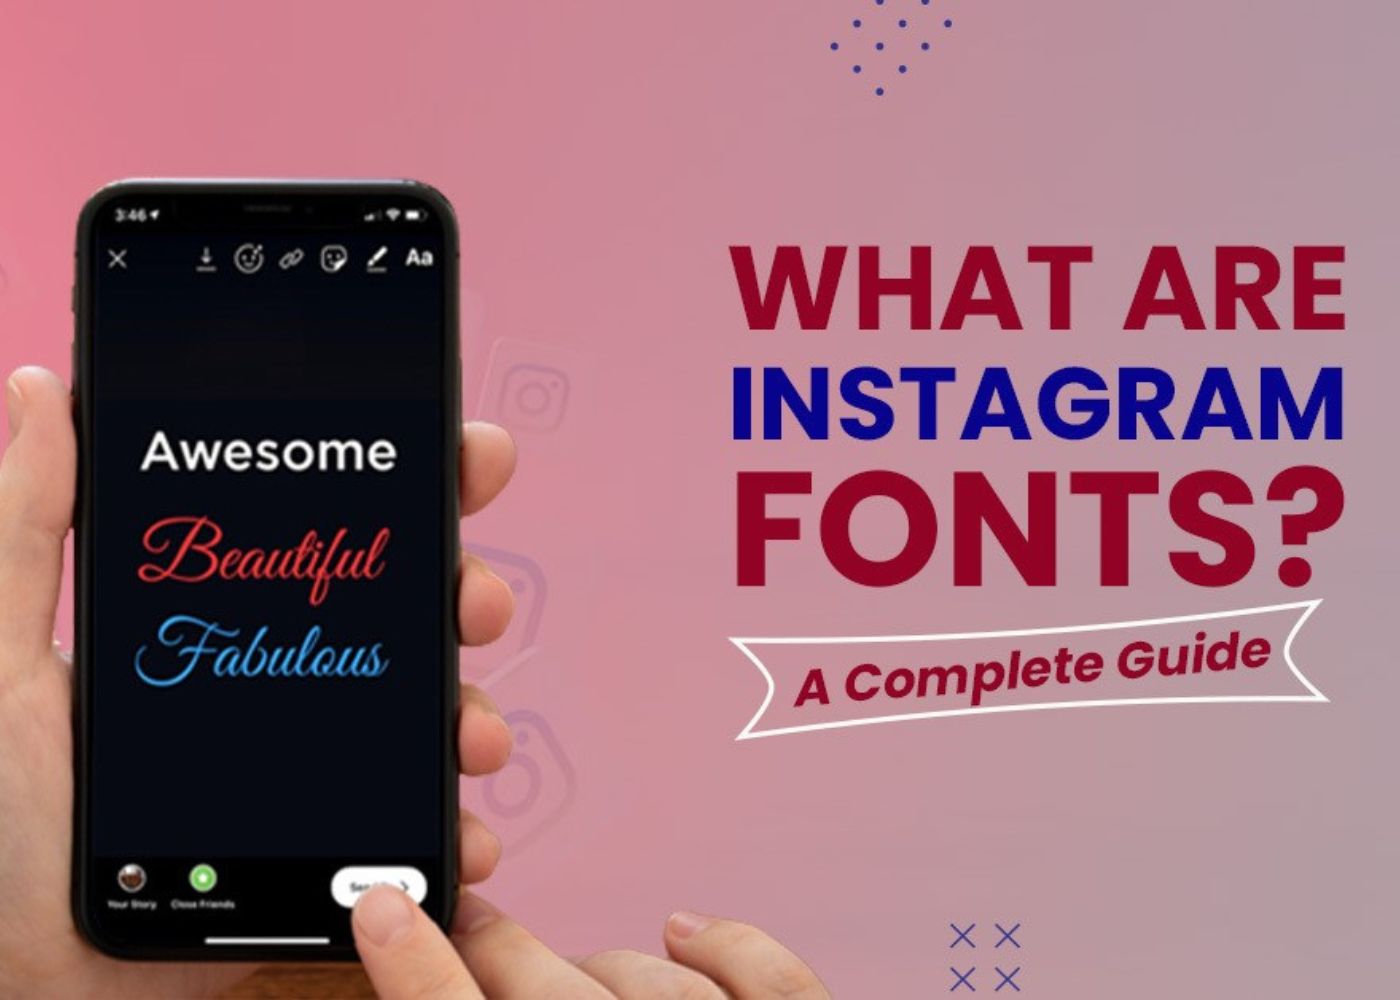 What Are Instagram Fonts? - A Complete Guide